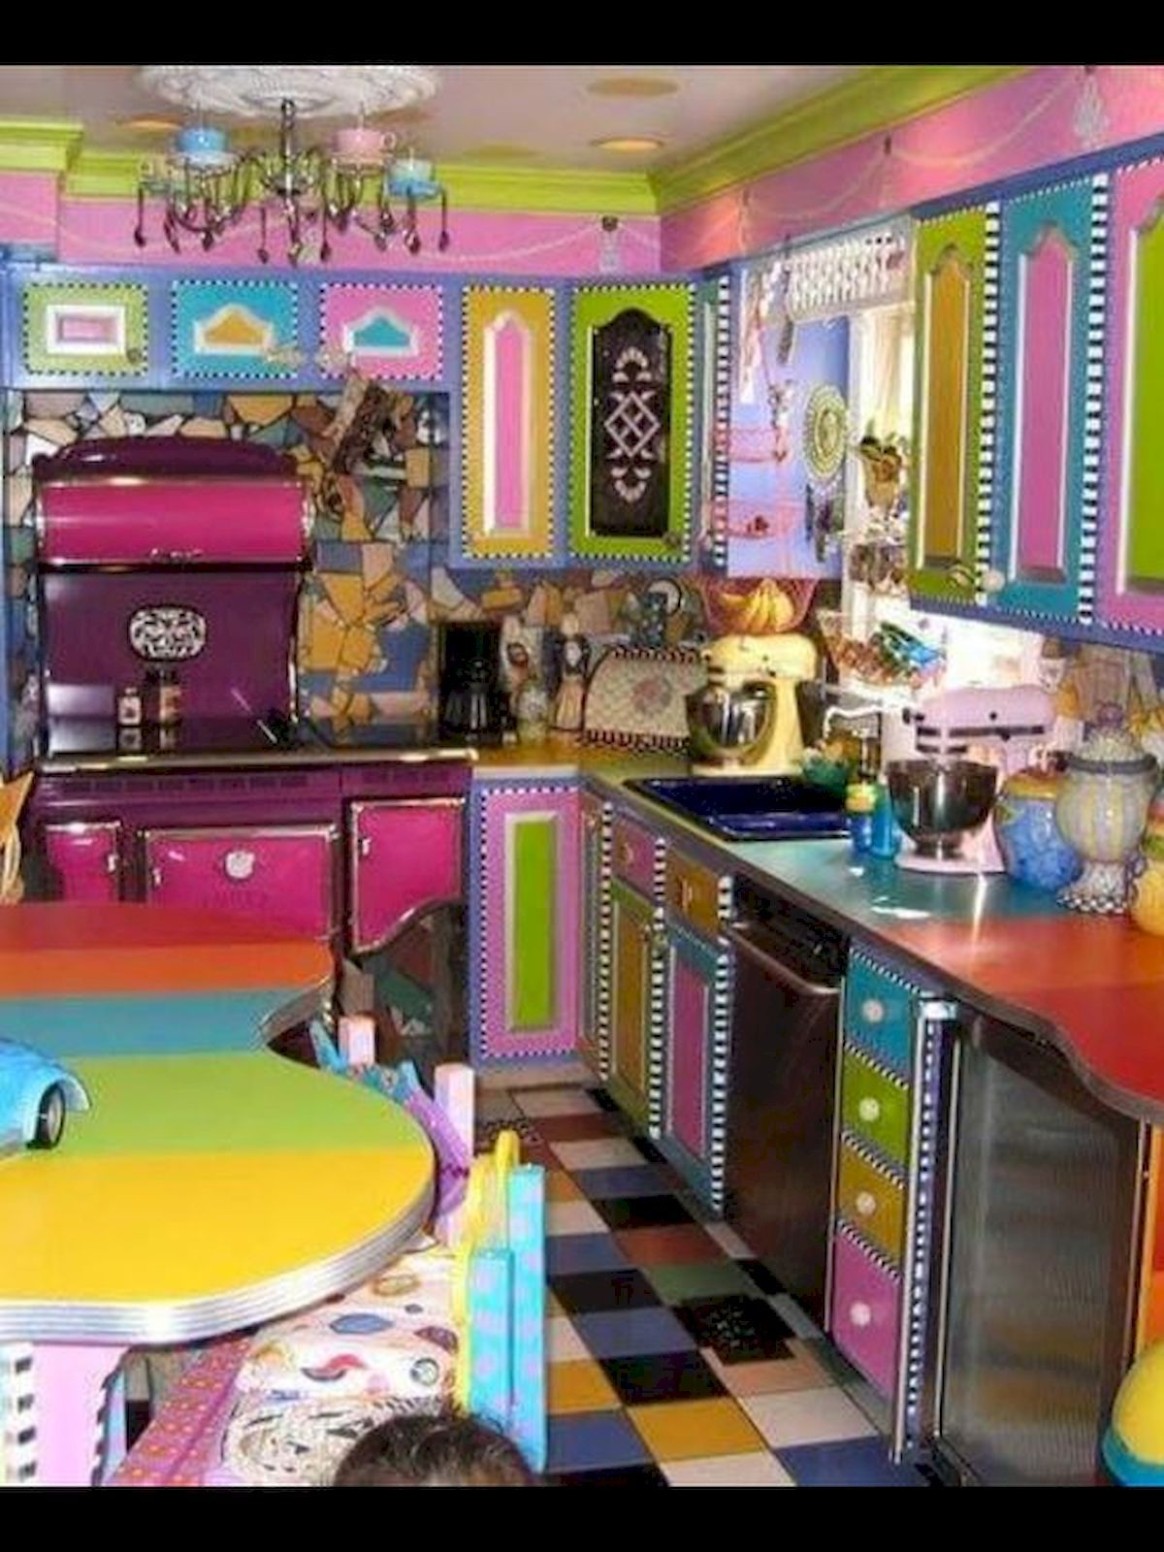 7 Amazing Kitchen Remodel and Decor Ideas With Colorful Design